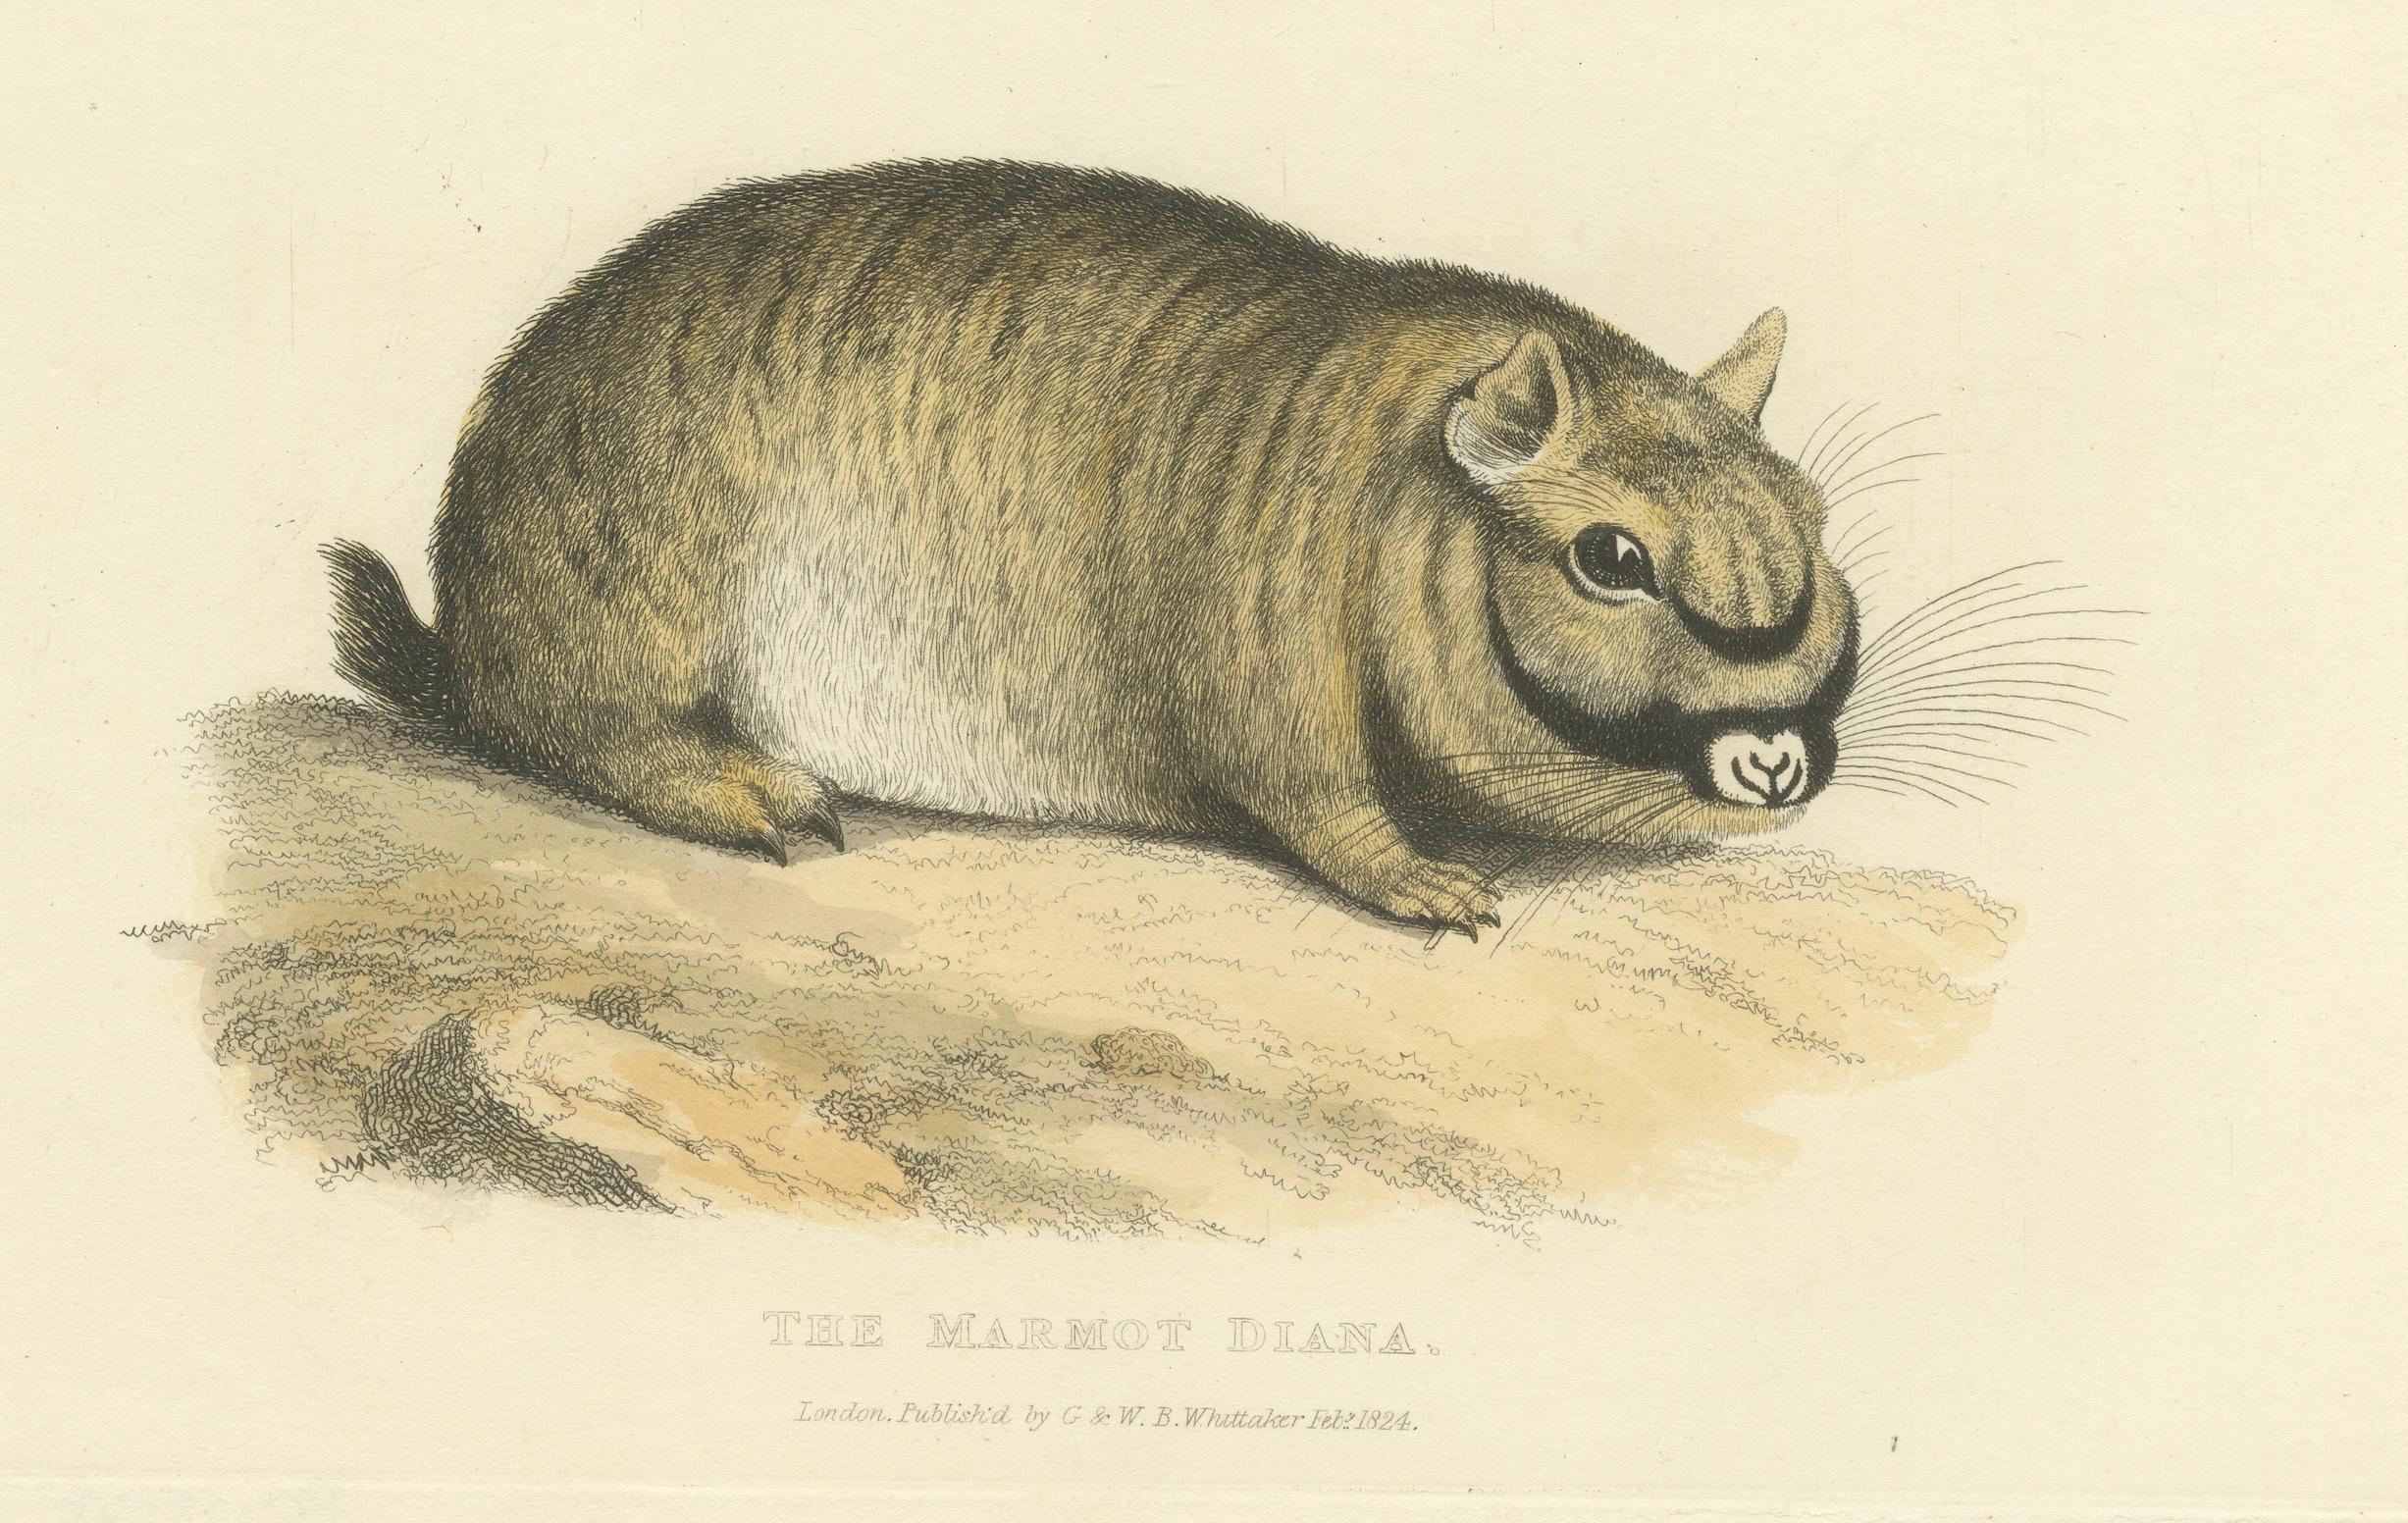 Paper Original Antique Print of Marmot Diana, an unknown variety of a Groundhog, 1824 For Sale